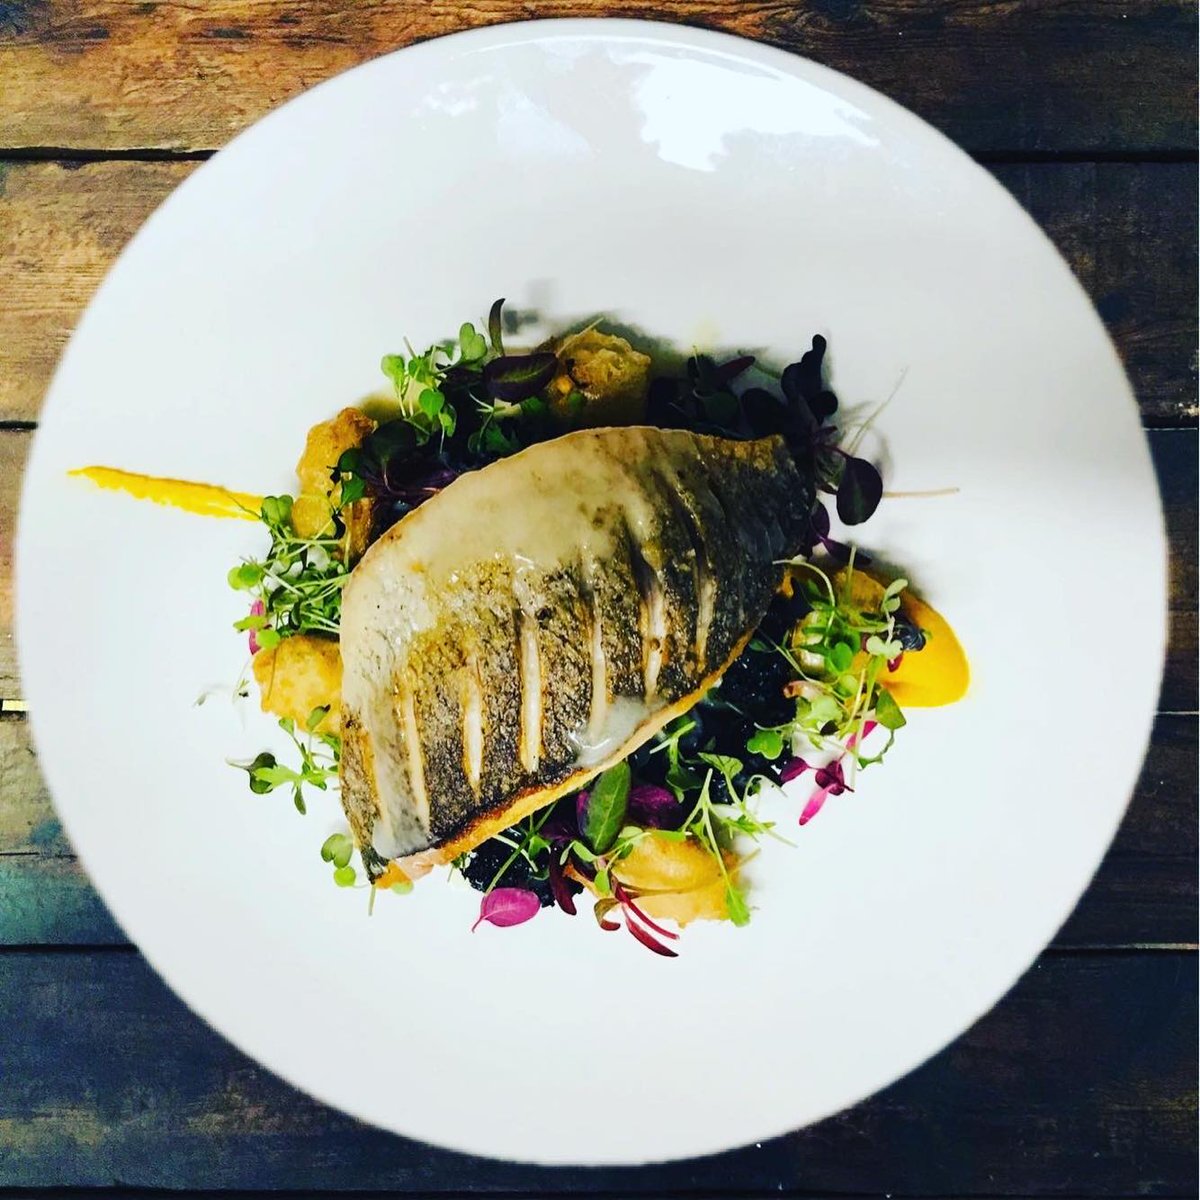 Our Fish special from last night 🐠 Pan Seared Sea-bream on a bed of crushed baby potatoes, pickled red onion & mascarpone cheese, with purple kale, tempura mussels, micro herbs & lemon Veloute sauce 🥬 🍋 🐟 #rivegauche #foodiesofinstagram #artofplatingfood #catchoftheday🎣